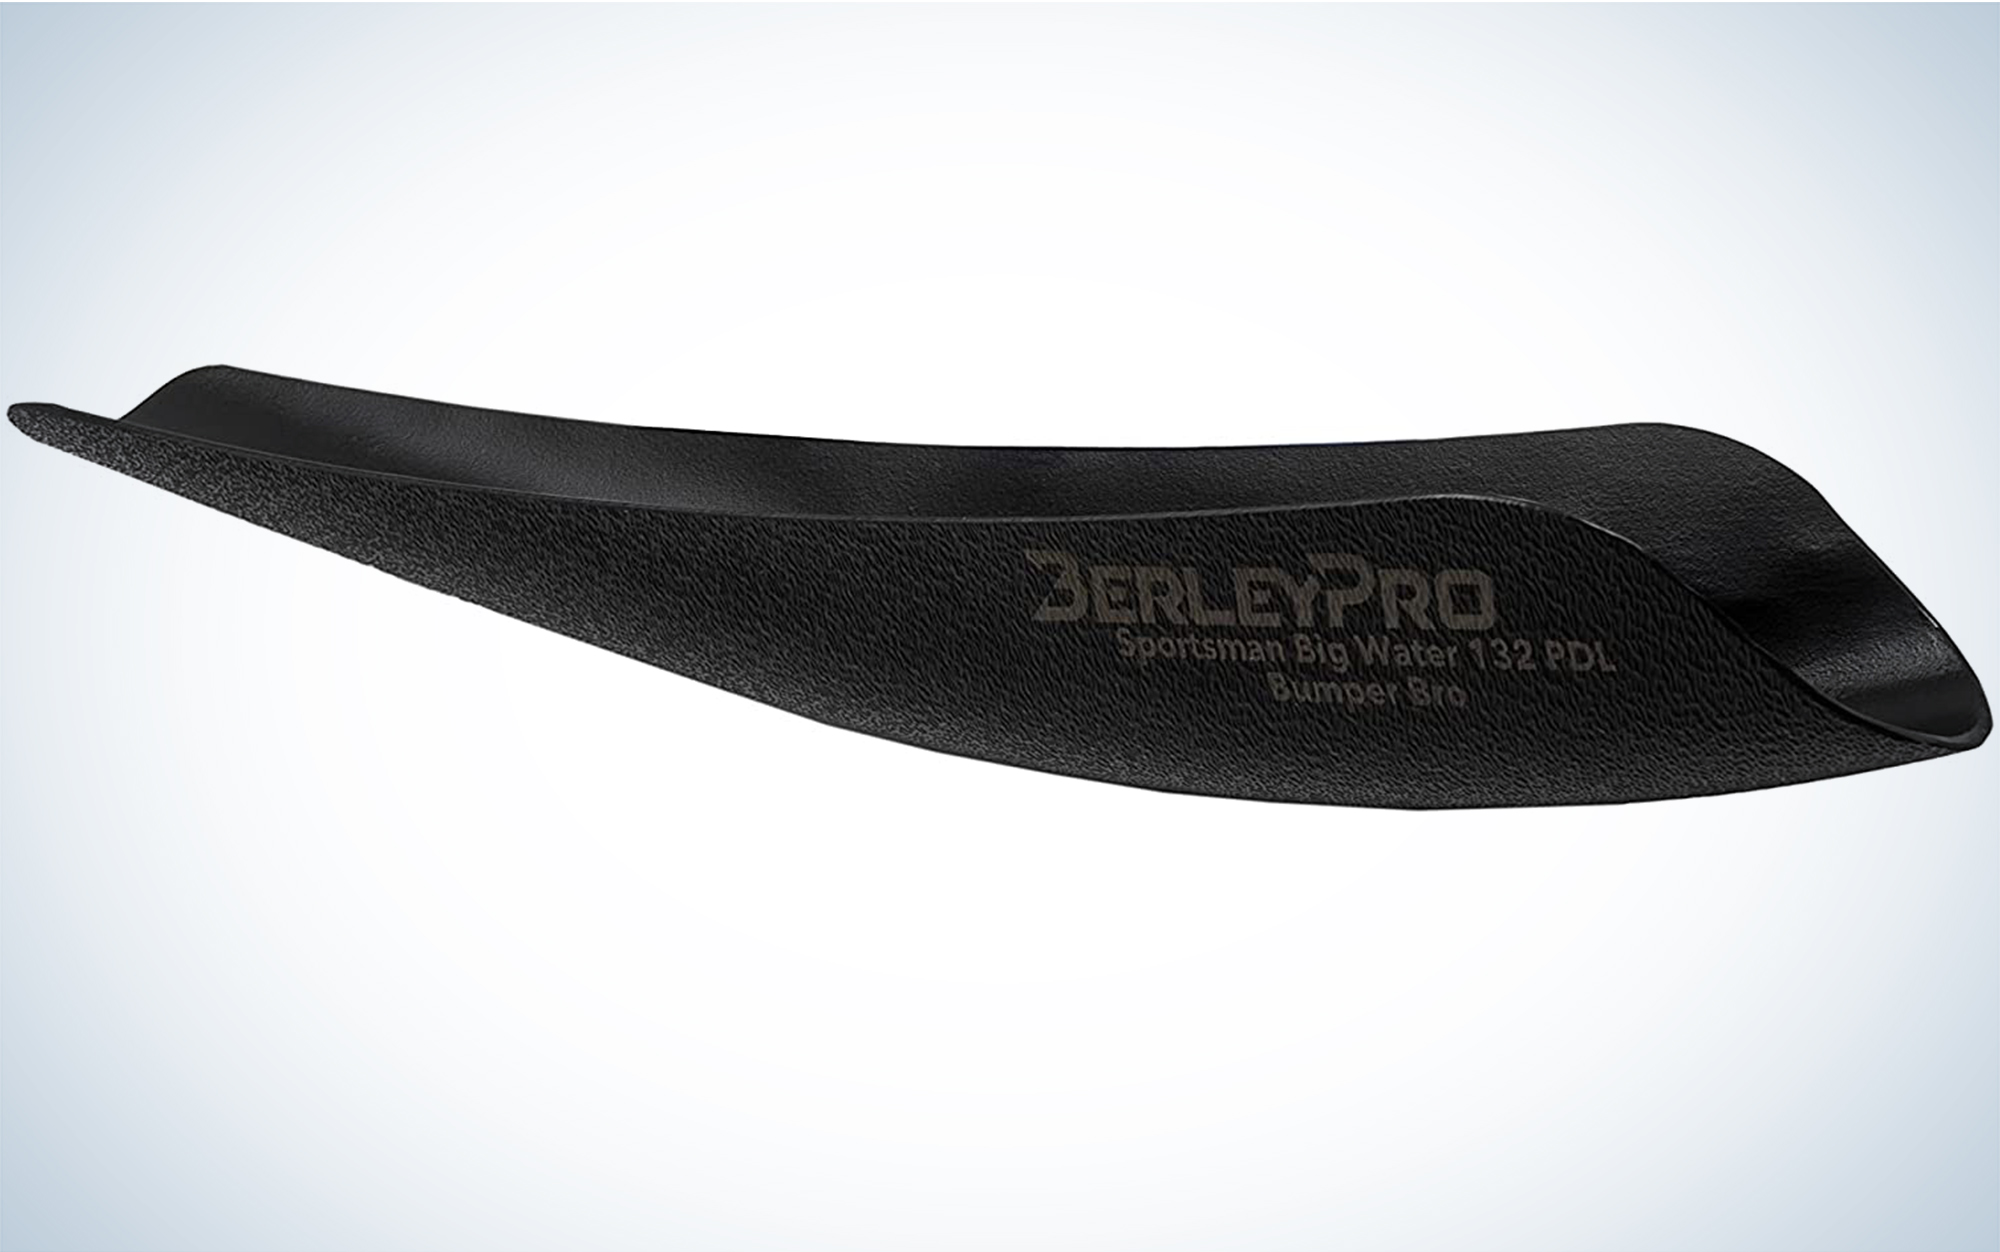 The Berley Pro Bumper Bro protects your kayak keel.